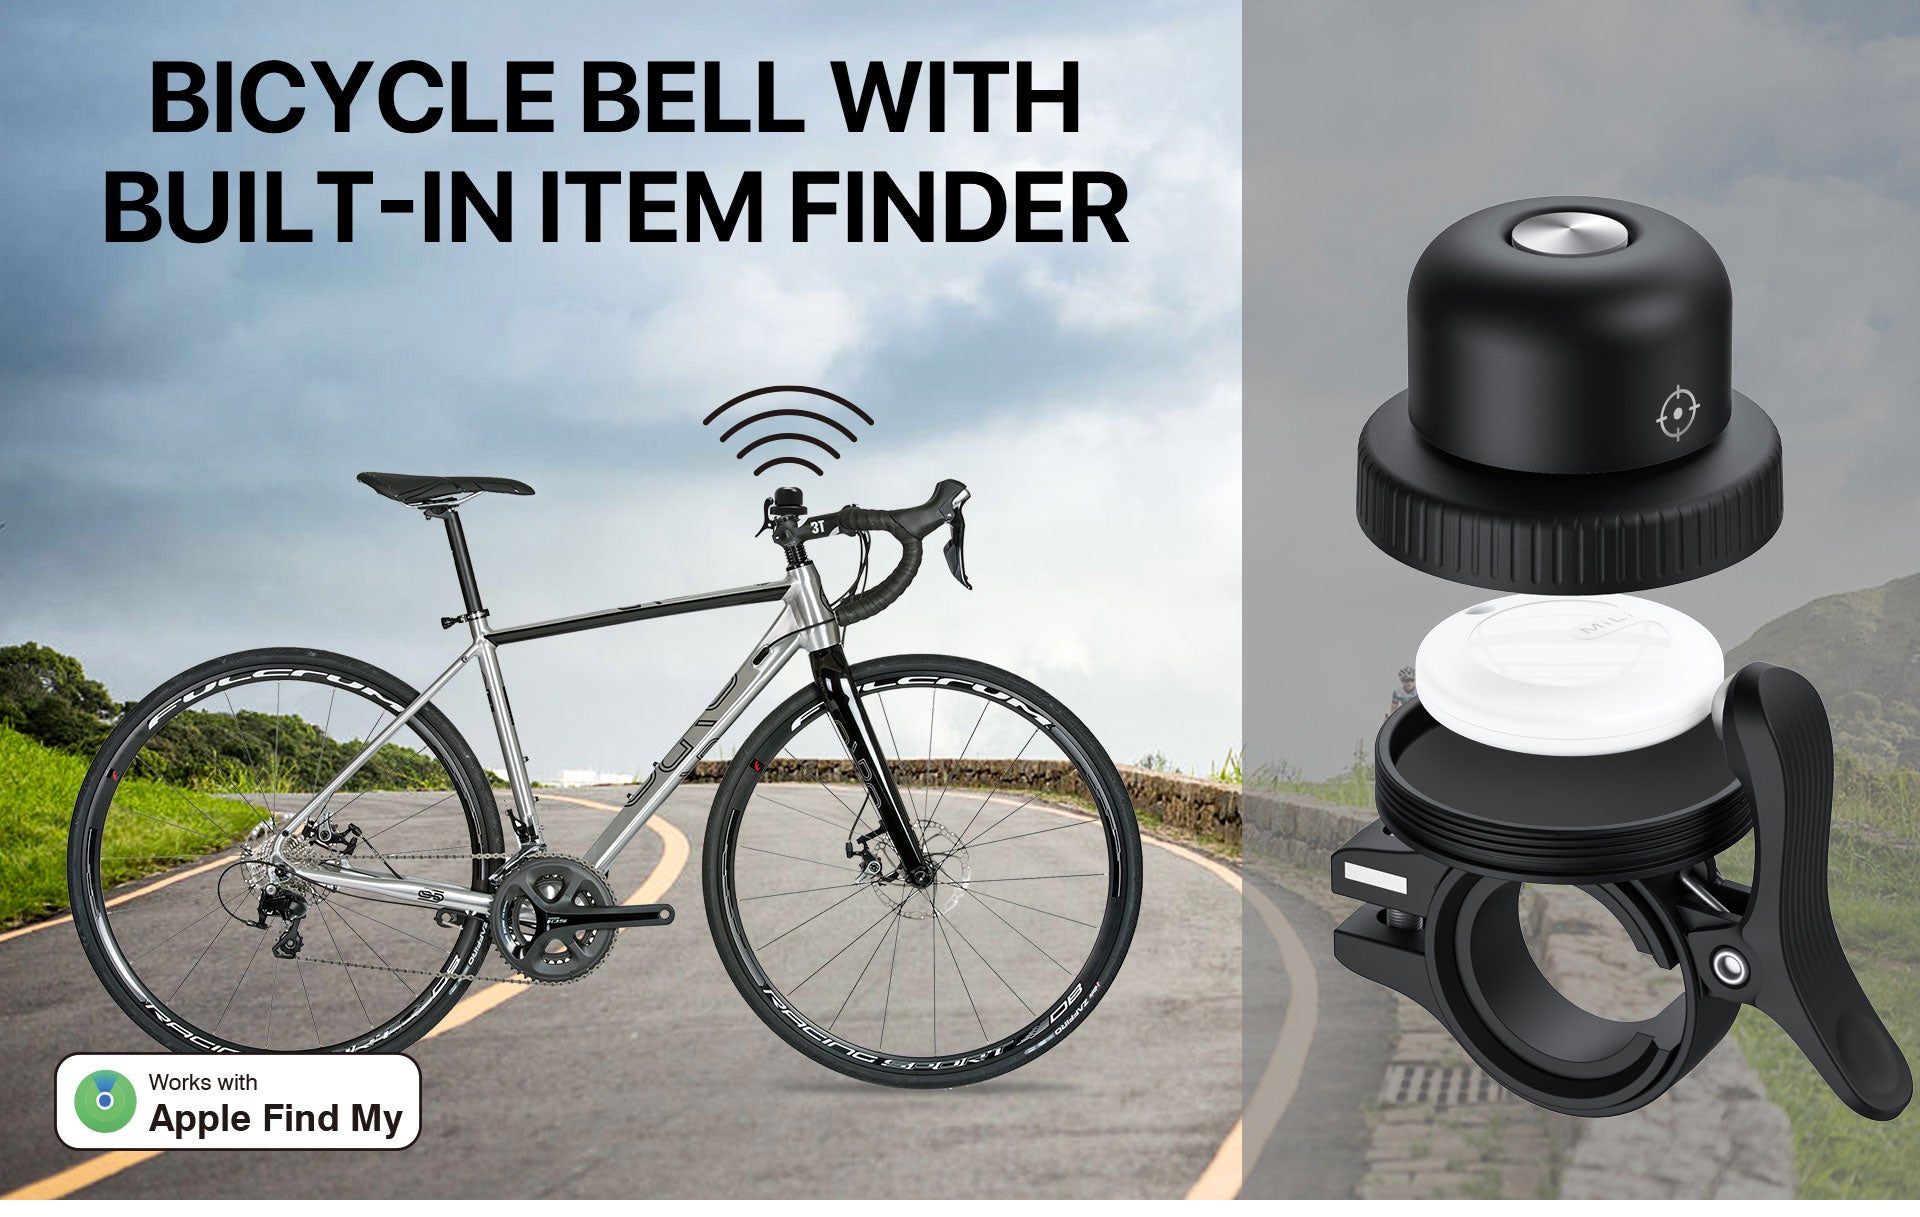 MiLi MiBell Bicycle Anti Loss Bell with Tracker - Black